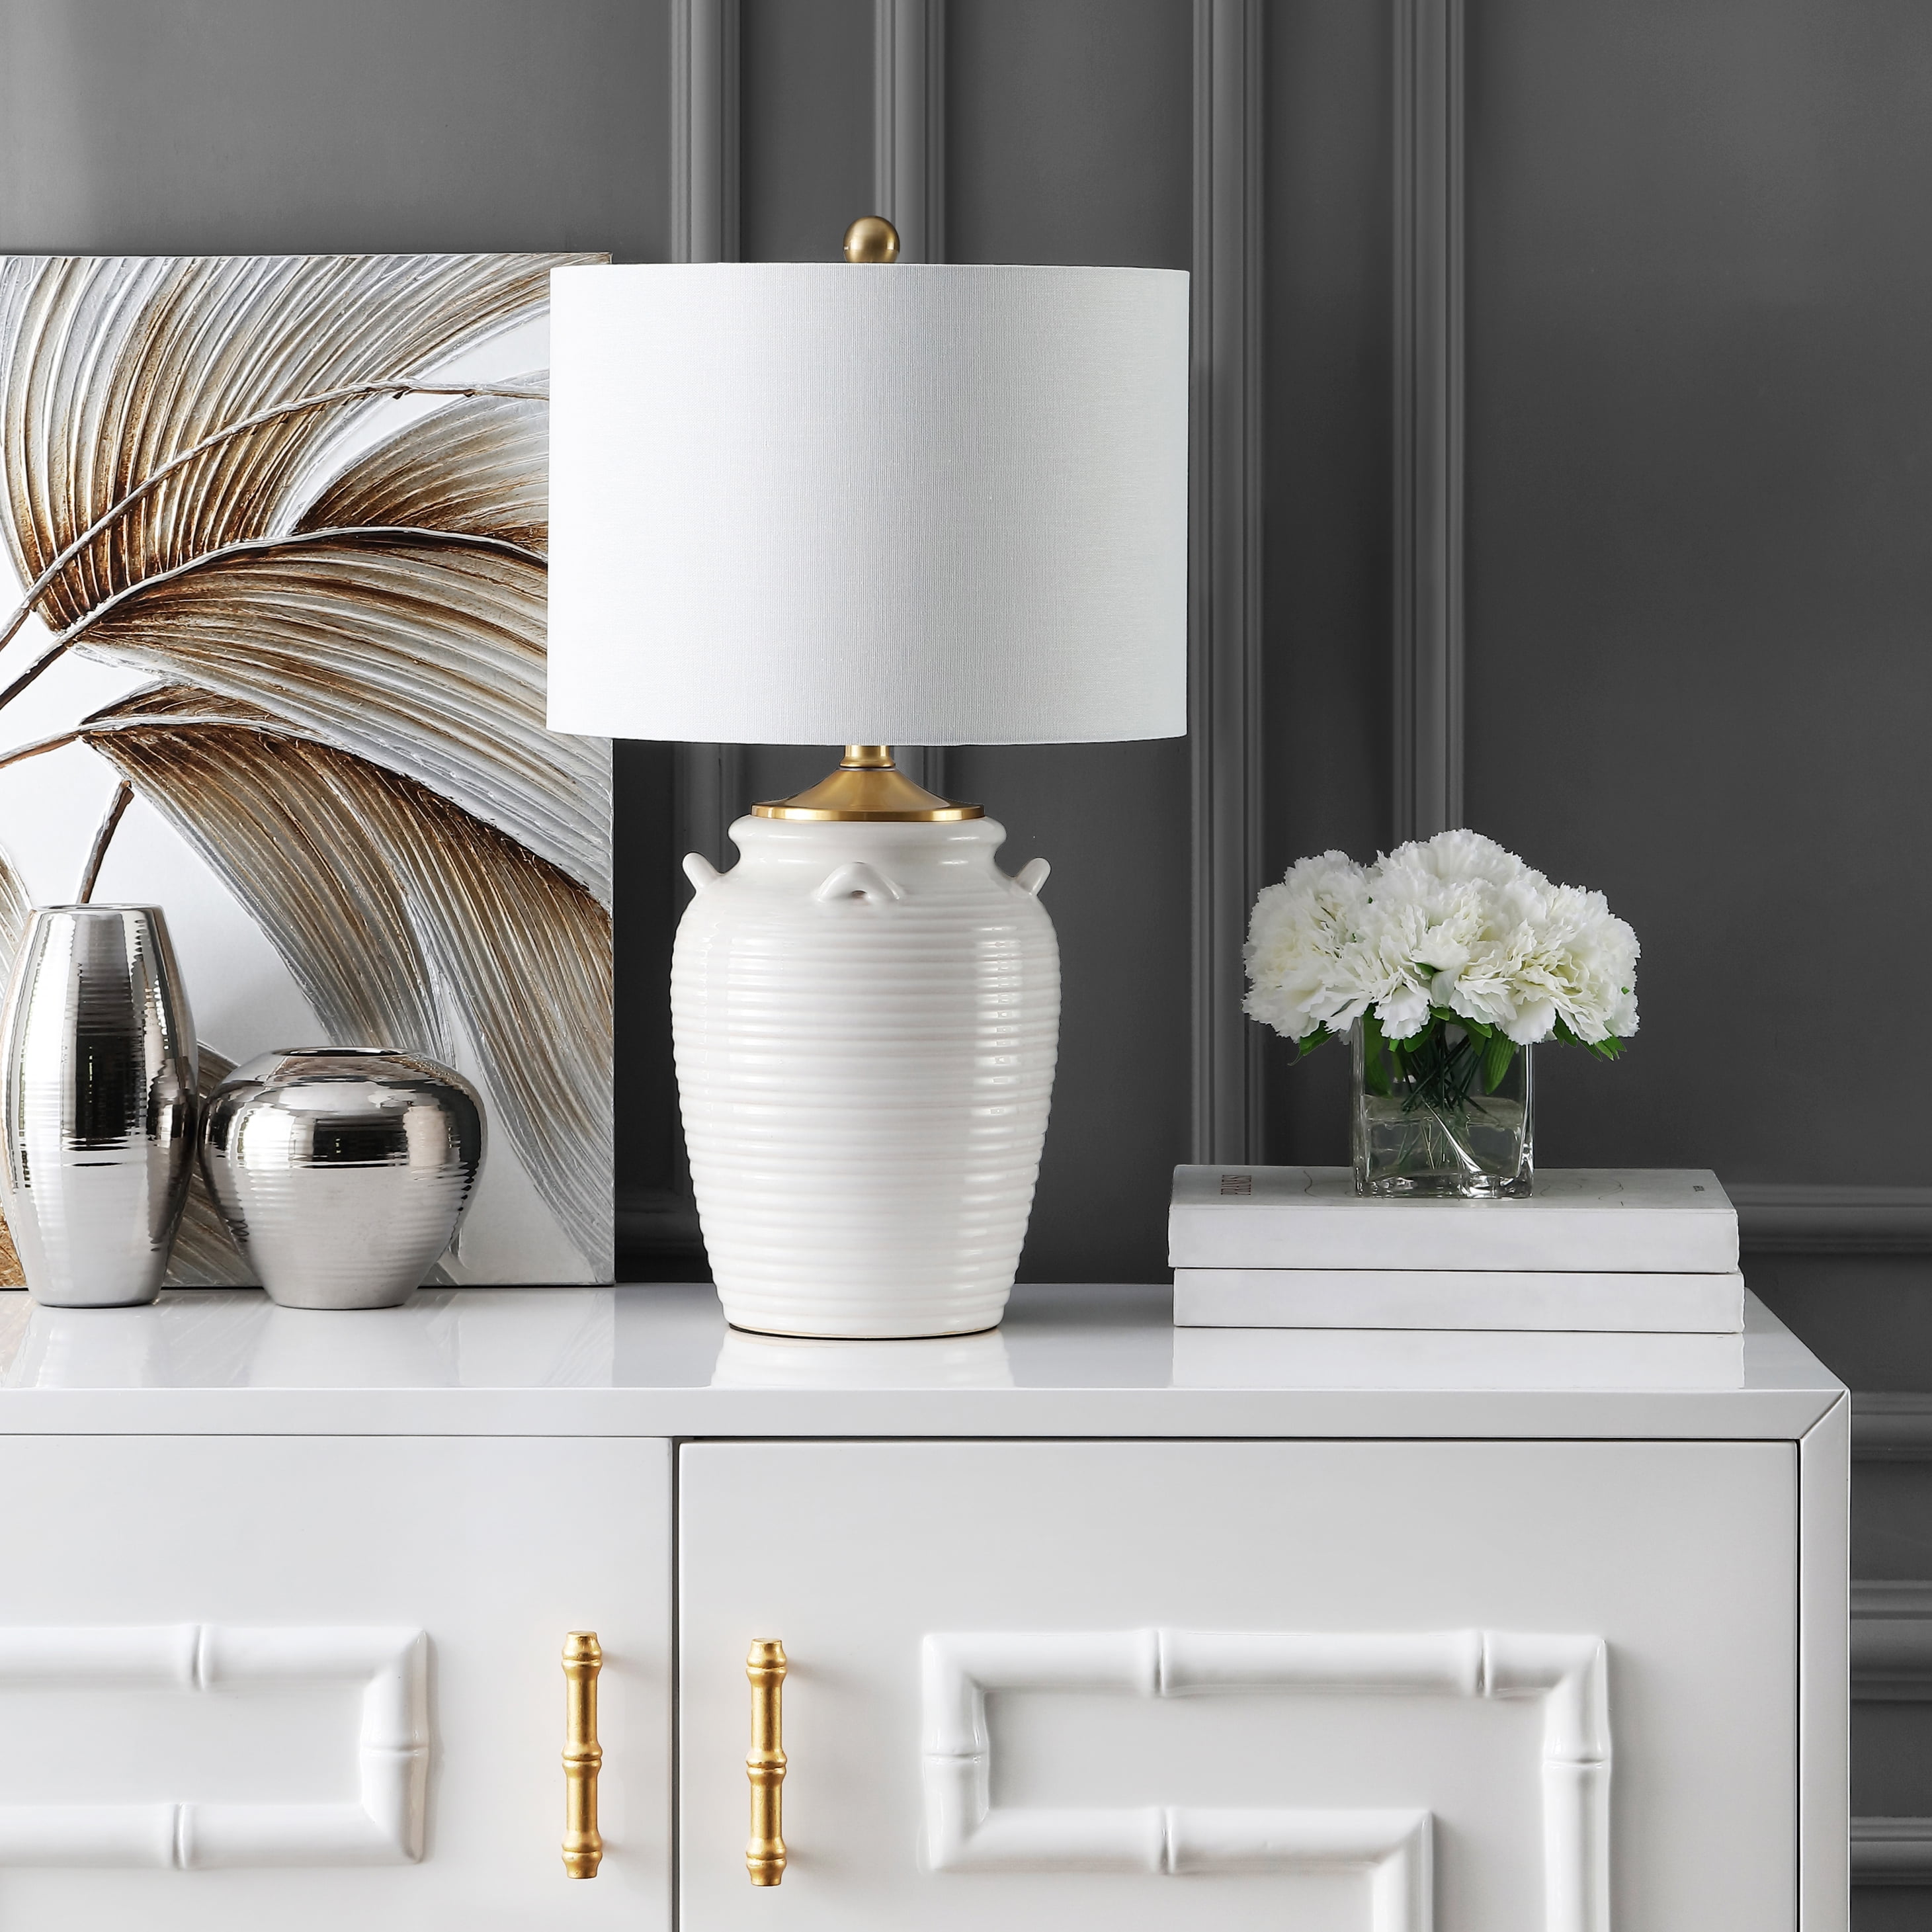 Signature Design By Ashley Jamon Casual, Jamon Beige Ceramic Table Lamps For Living Room